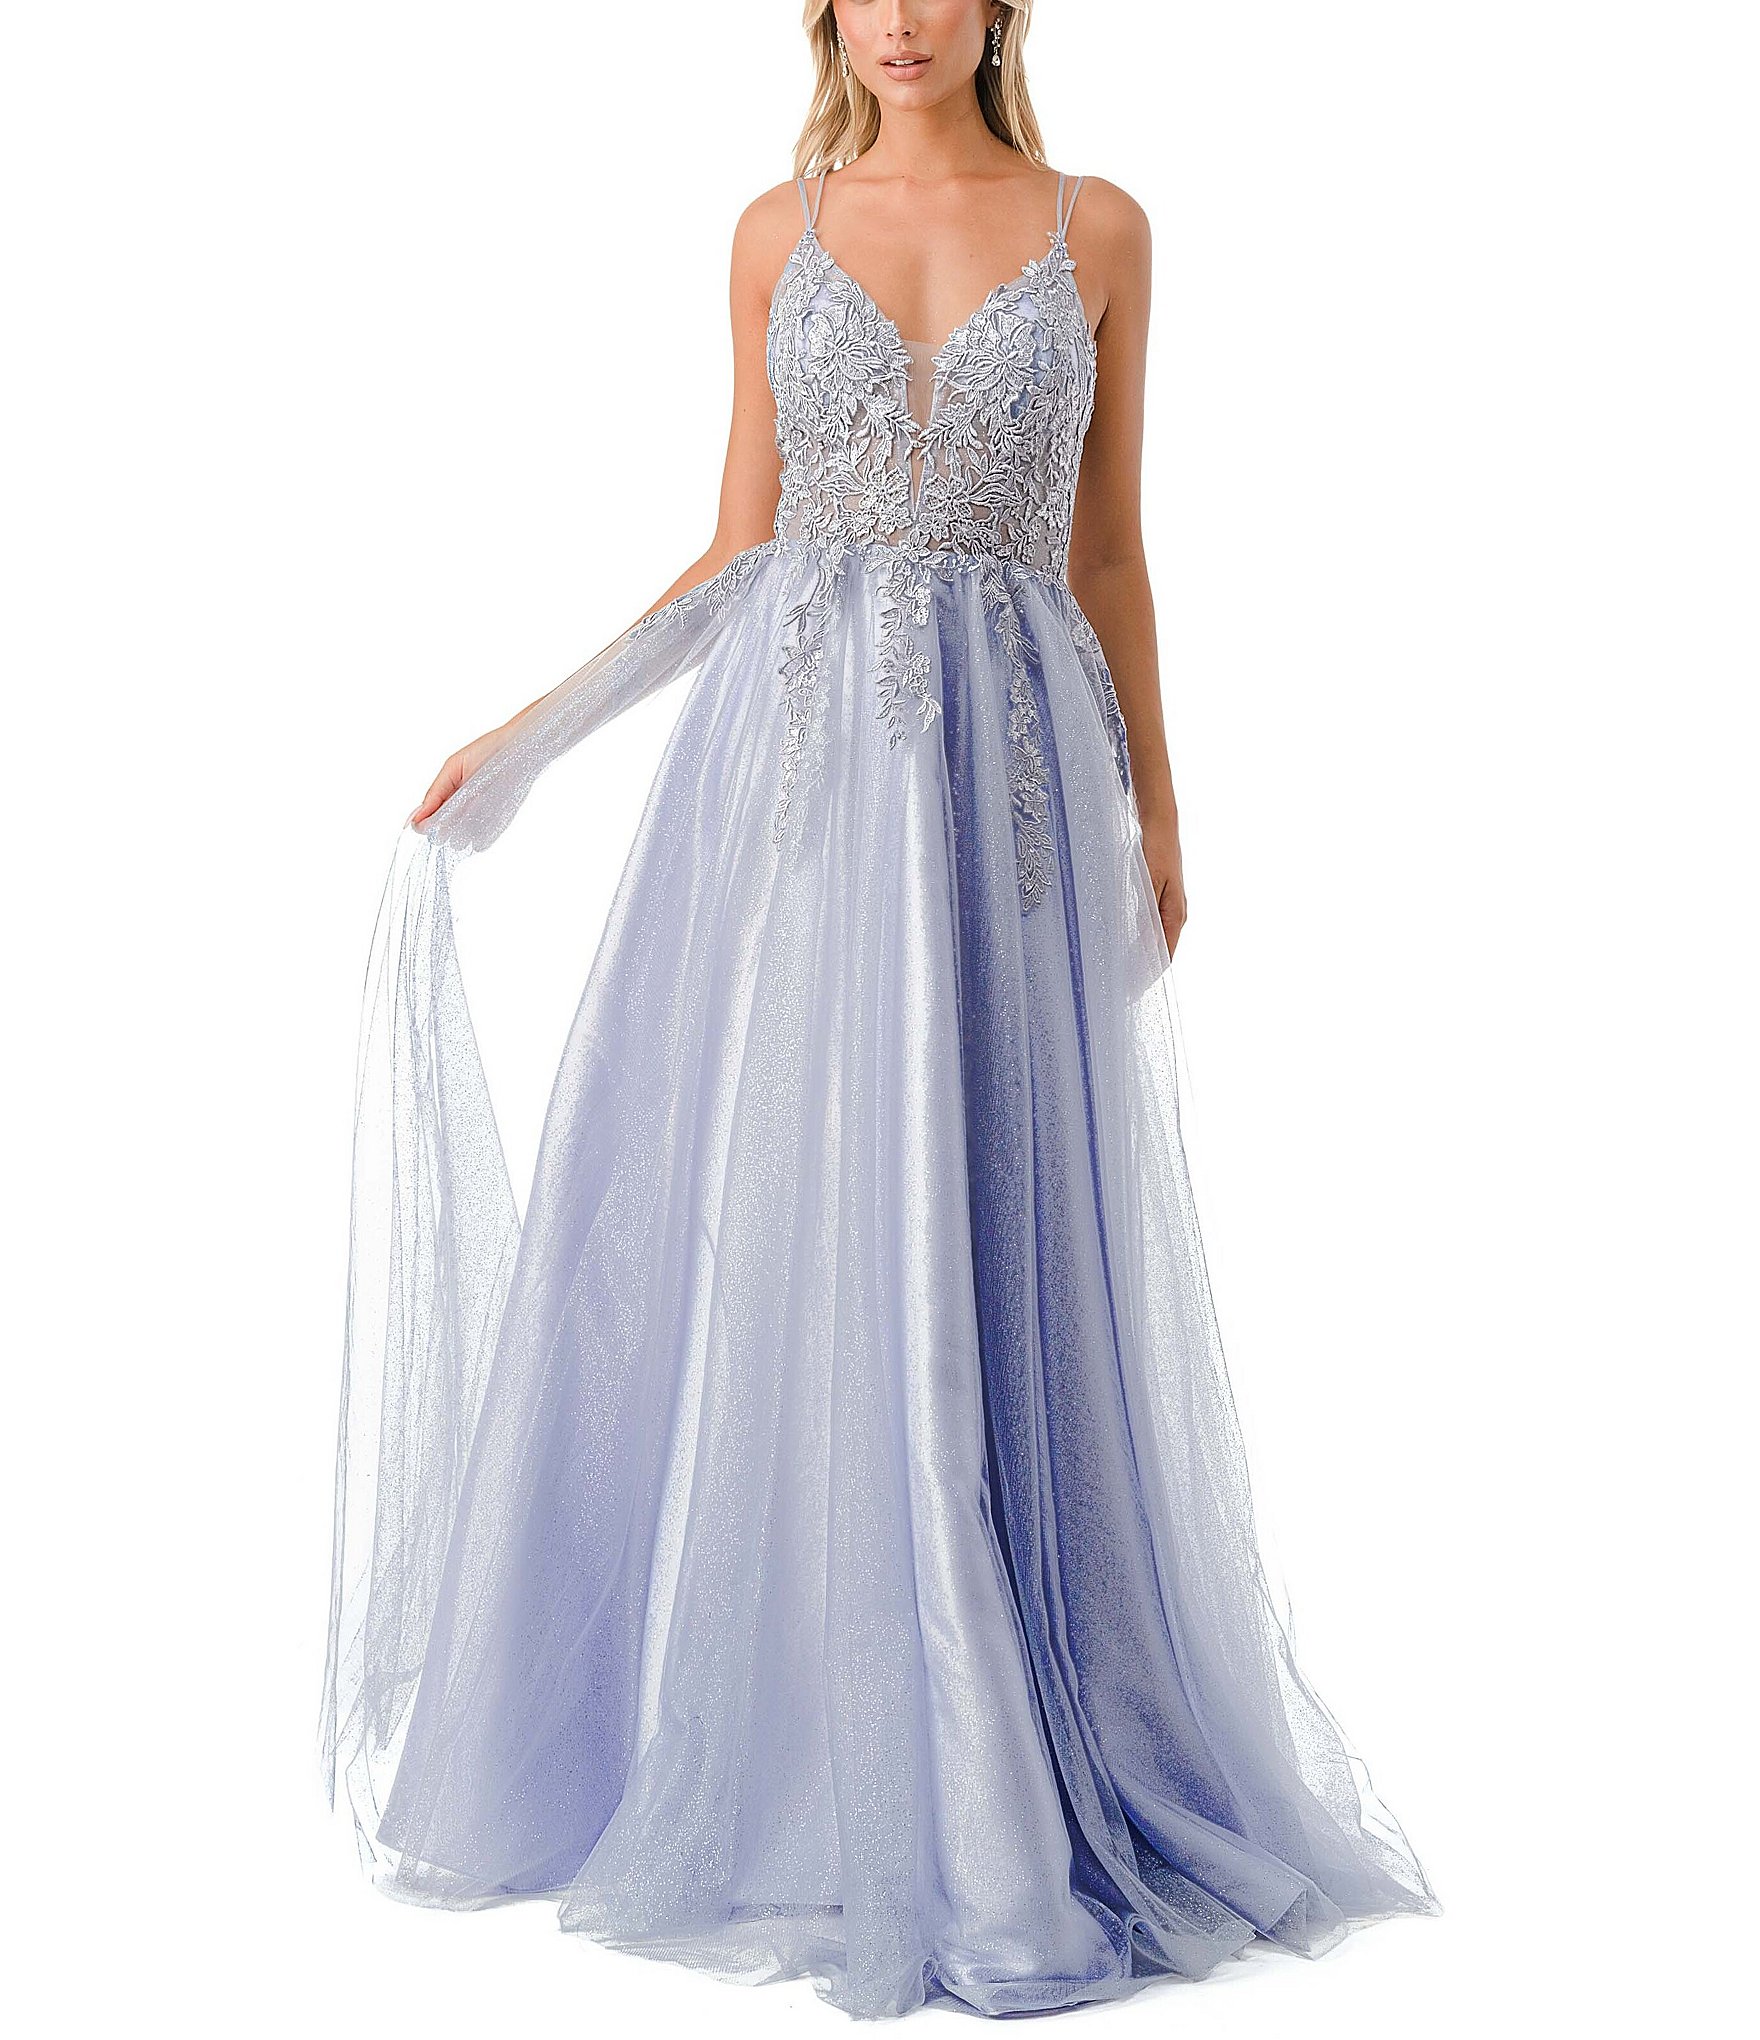 Coya Collection Embroidered Illusion Bodice V-Neck Ball Gown | Dillard's